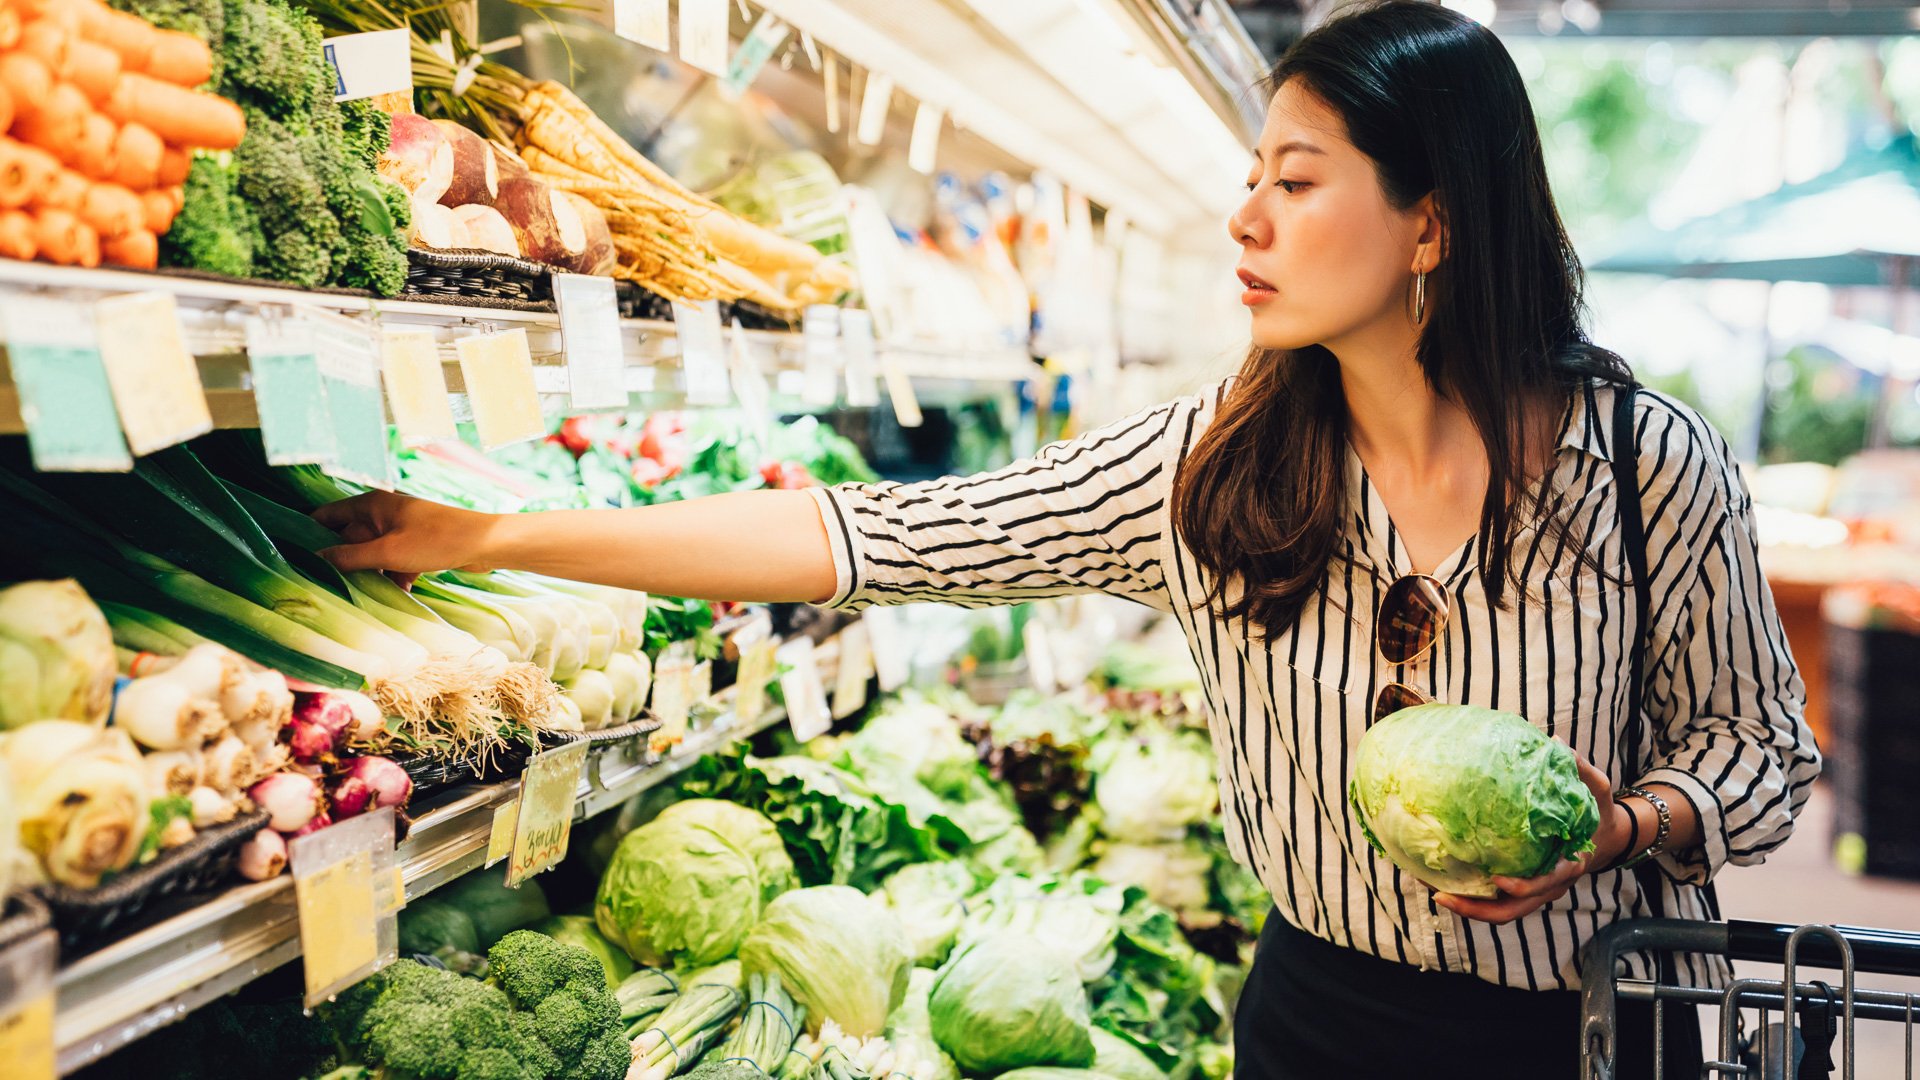 9 Good Habits That Lower Your Grocery Bill